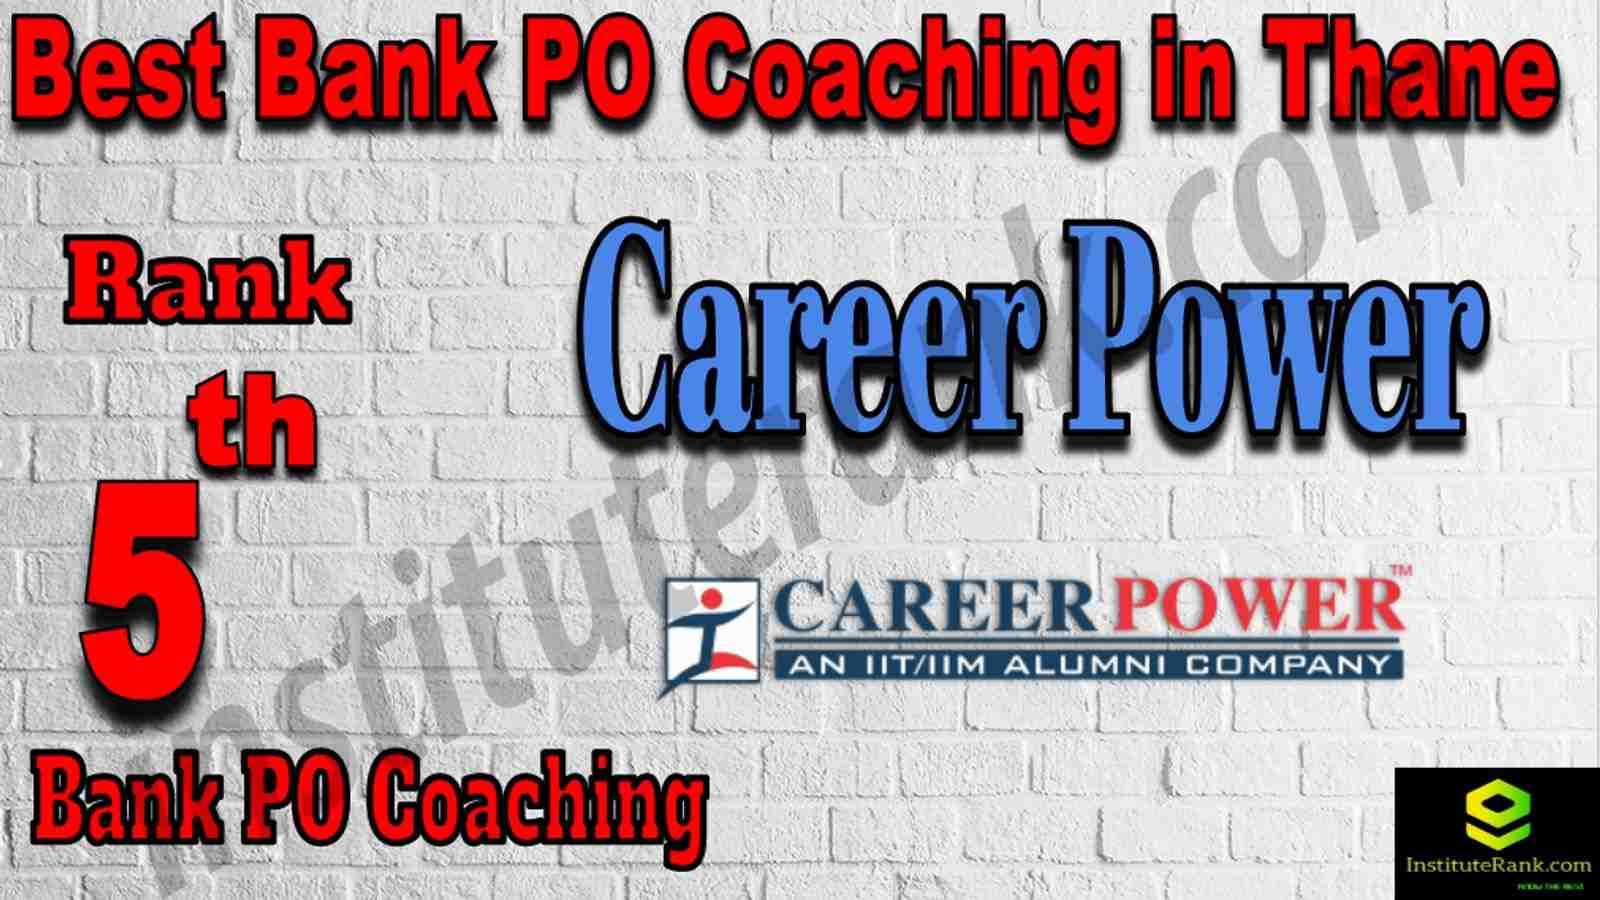 5th Best Bank PO Coaching in Thane